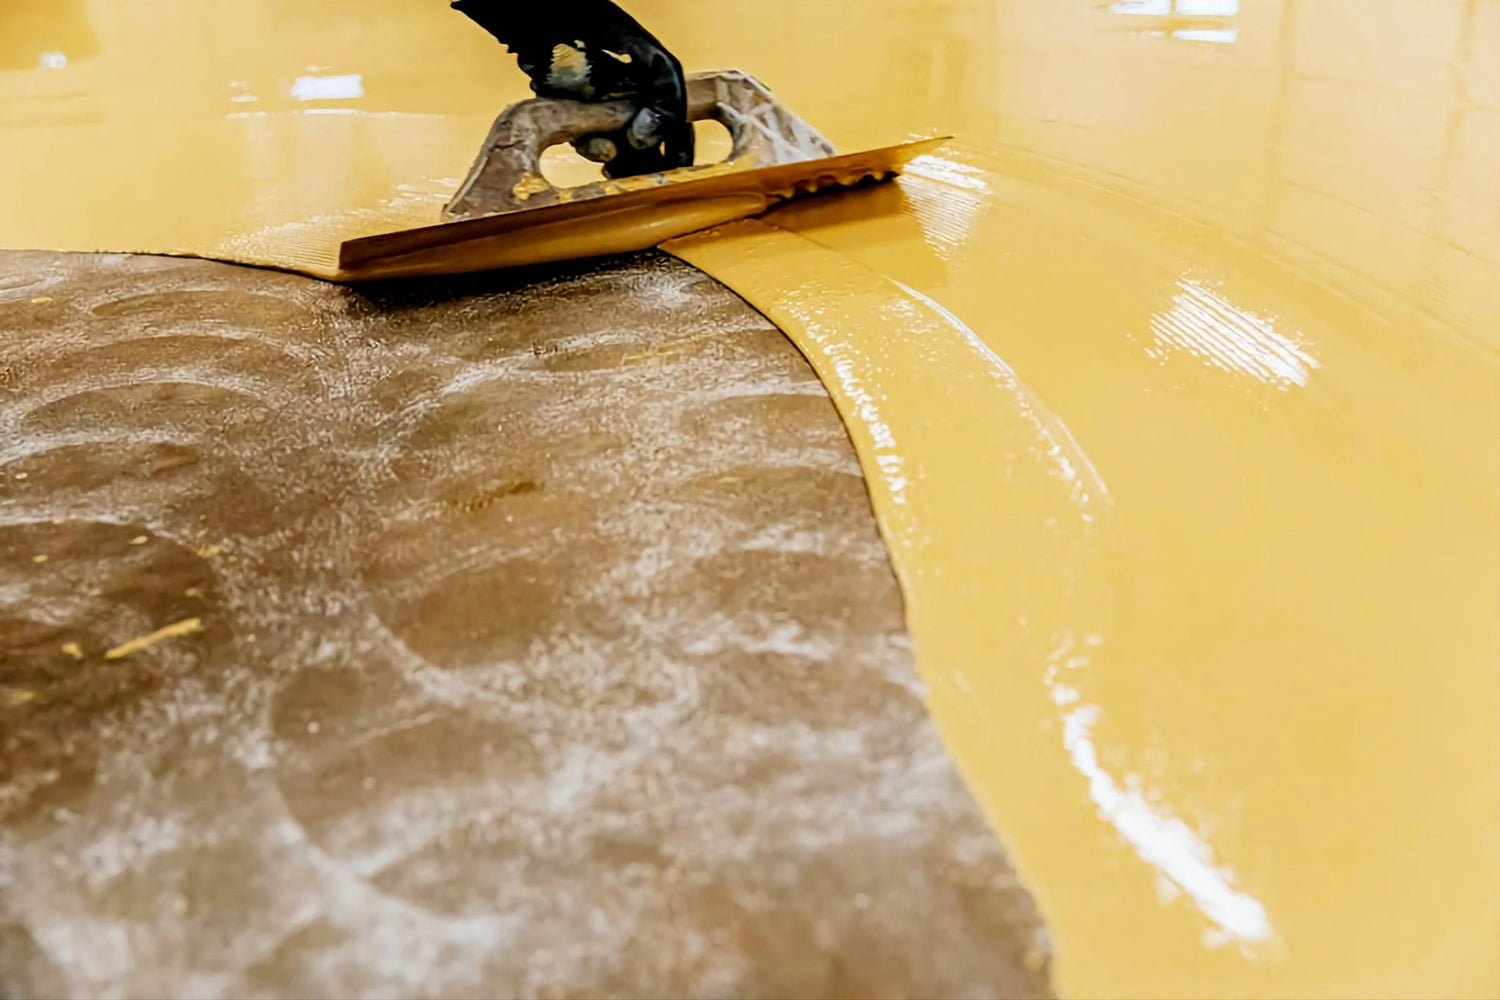 Let's Learn How to Use Pro Perfect Epoxy Polish on Resin Projects